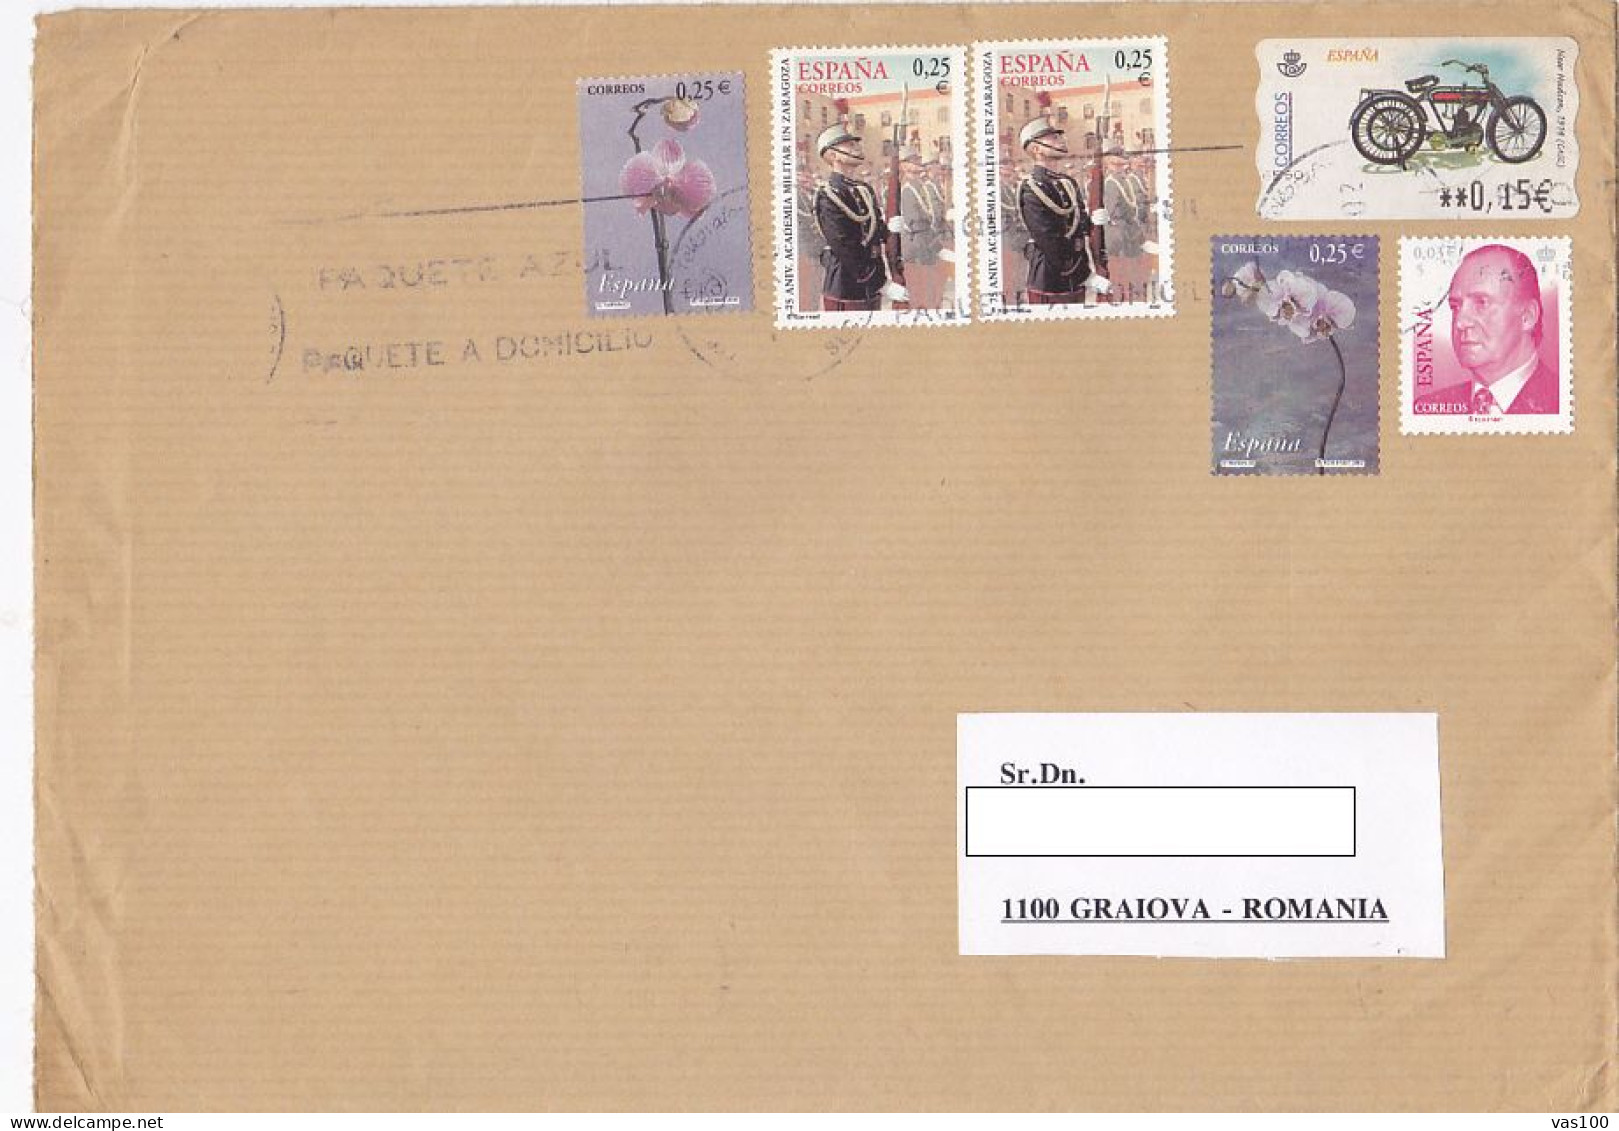 ORCHIDS, ZARAGOZA MILITARY ACADEMY, KING JUAN CARLOS, MOTORBIKE, STAMPS ON COVER, 2002, SPAIN - Briefe U. Dokumente